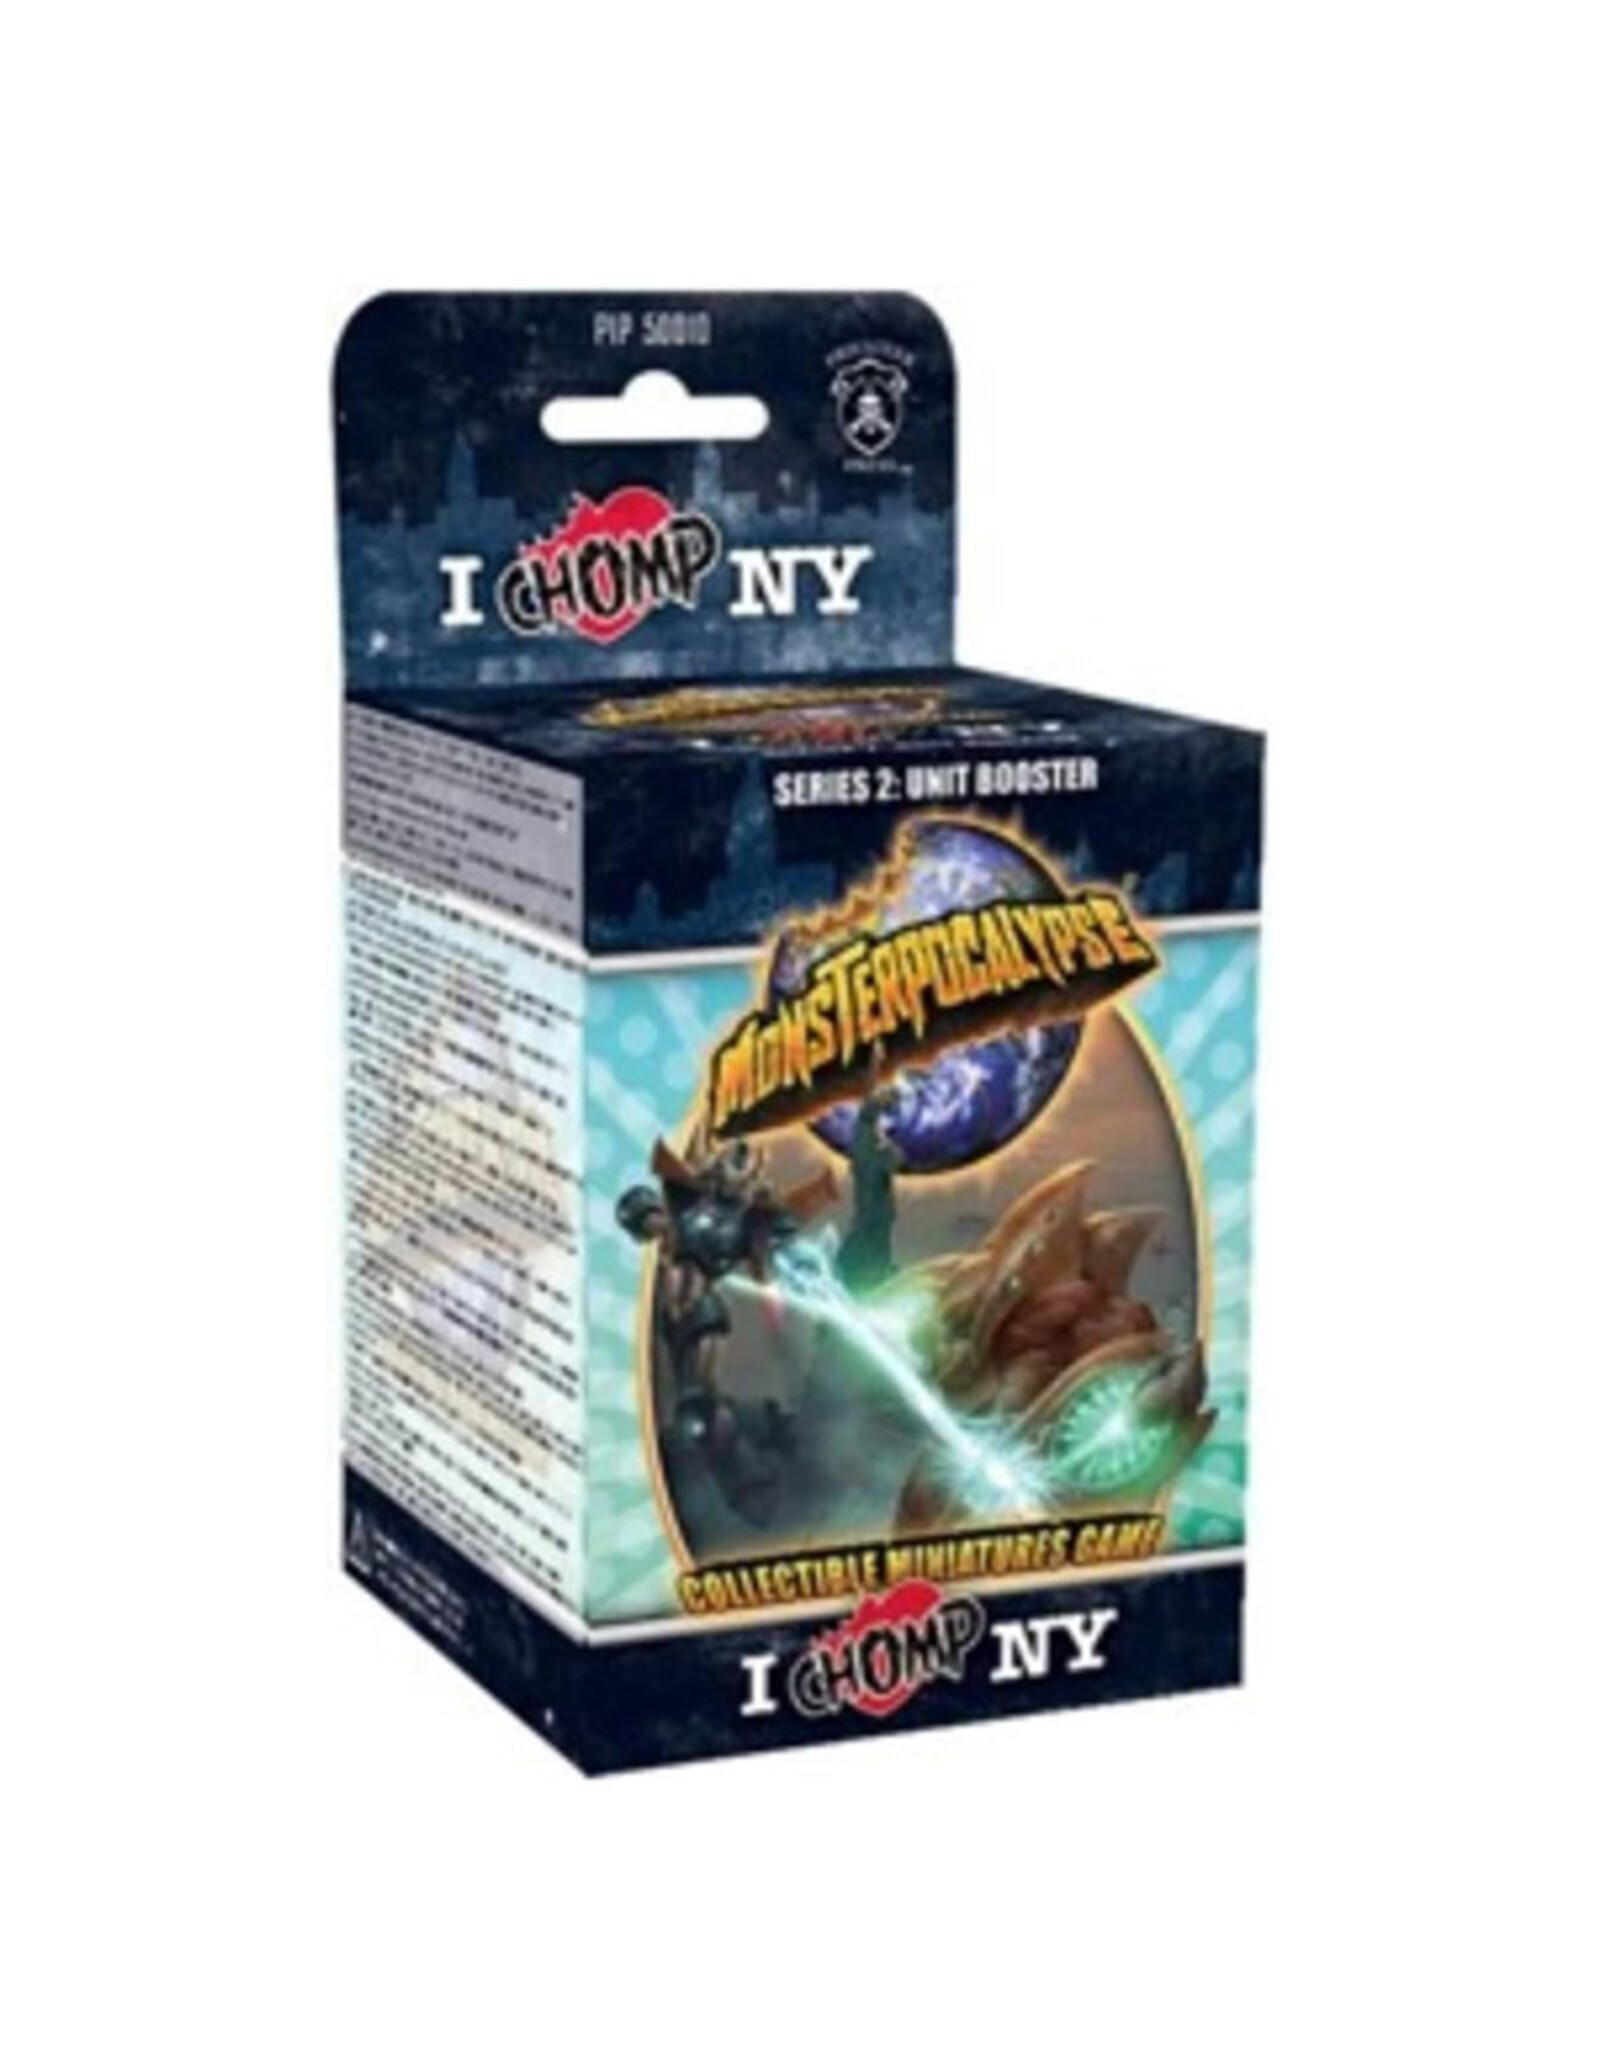 Privateer Press Monsterpocalypse Collectible Miniature Game Monster Booster Pack Series 2 Chomp NY